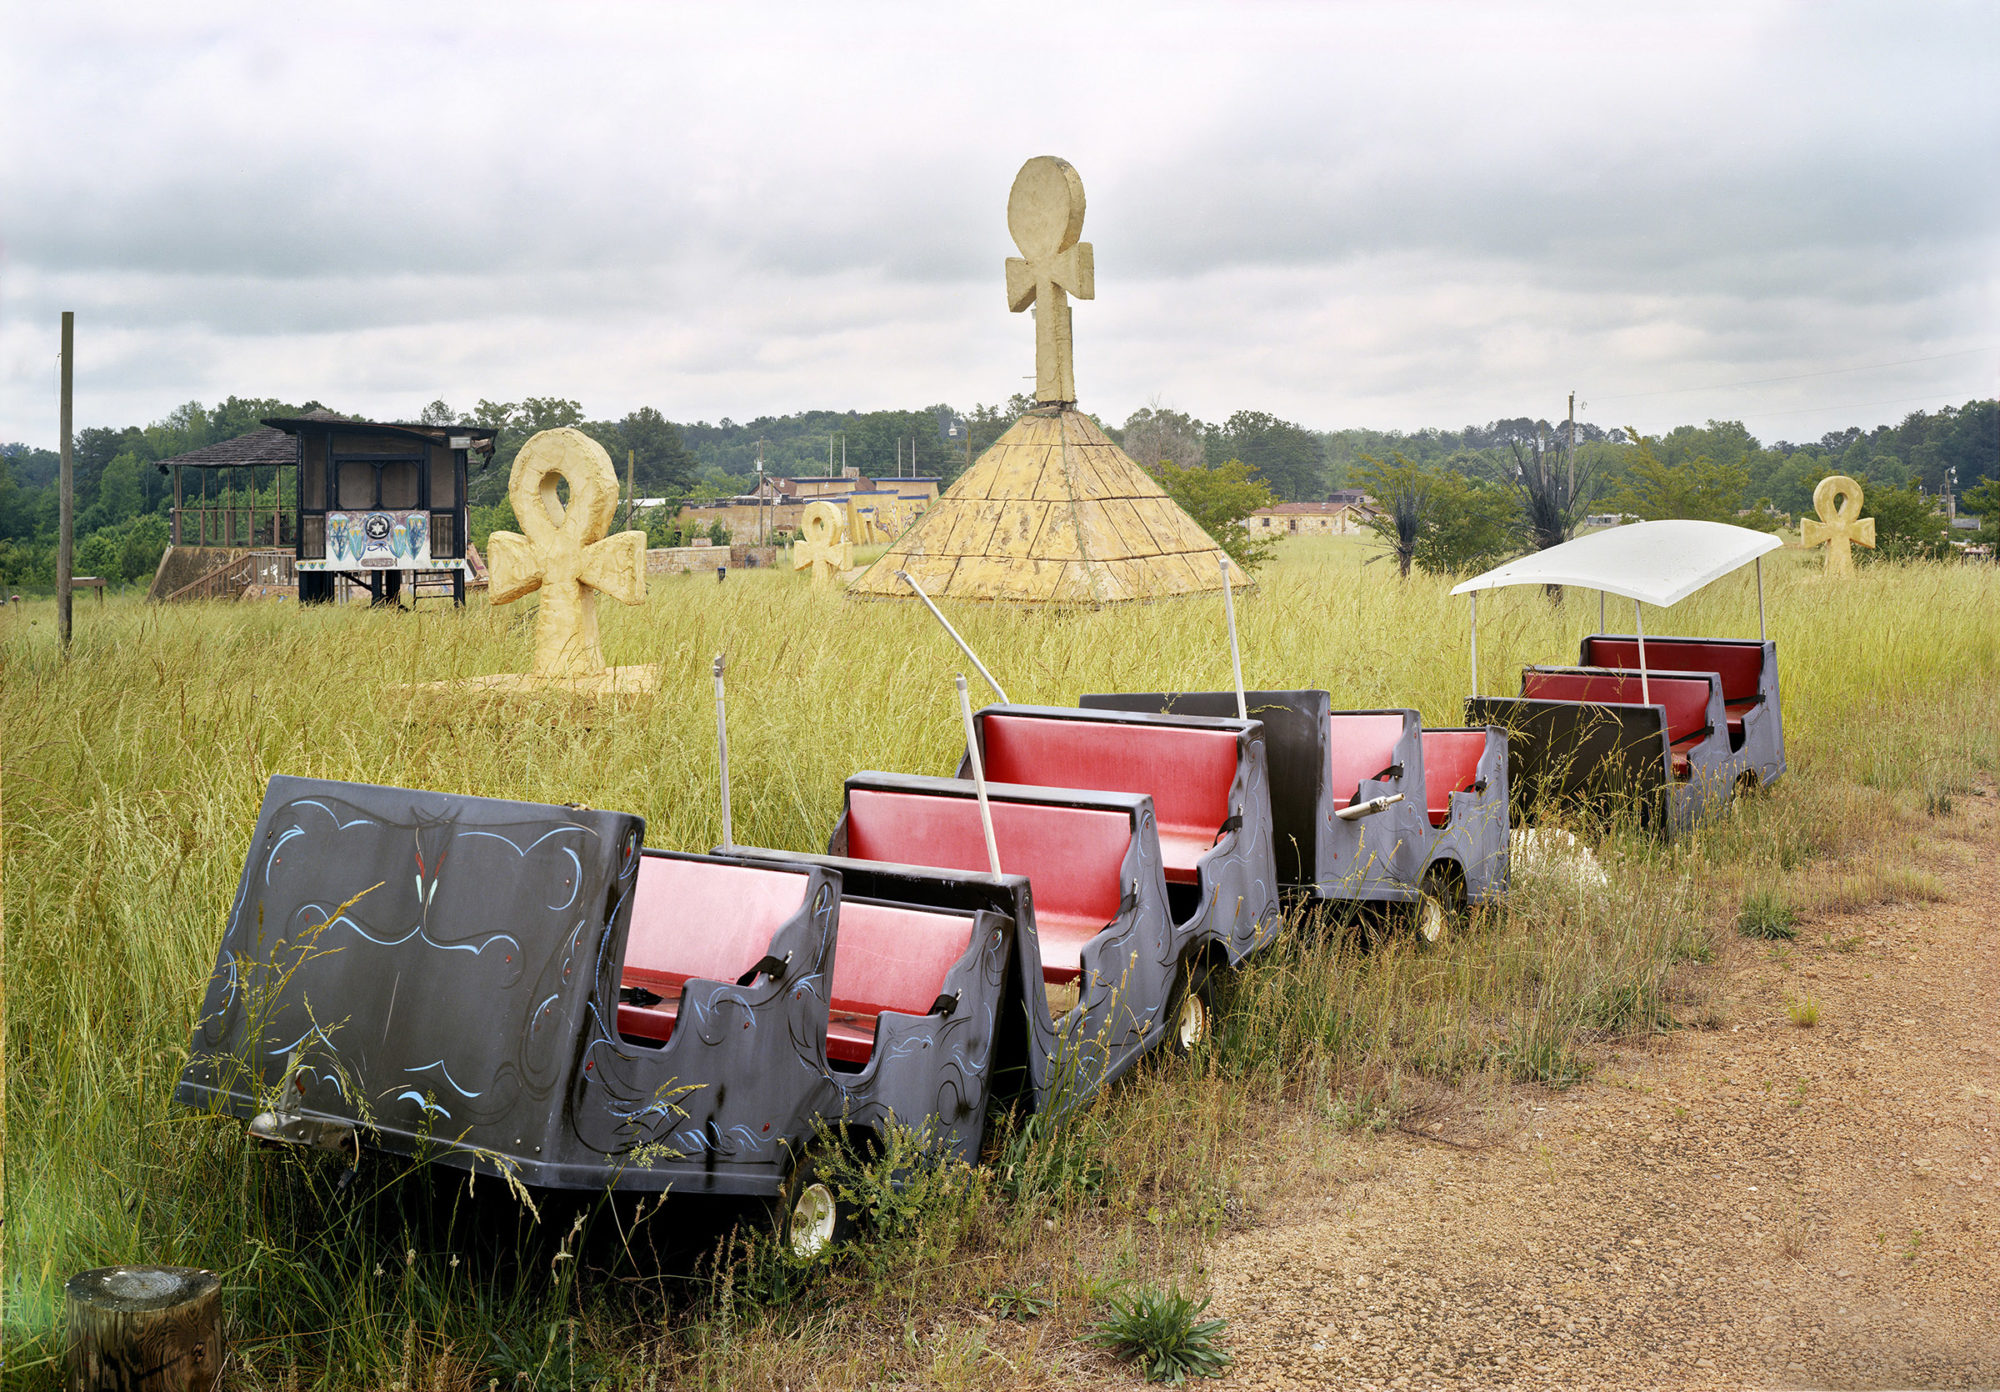 red and black booths on wheels but abandoned in a field with large, Egyptian cross symbols